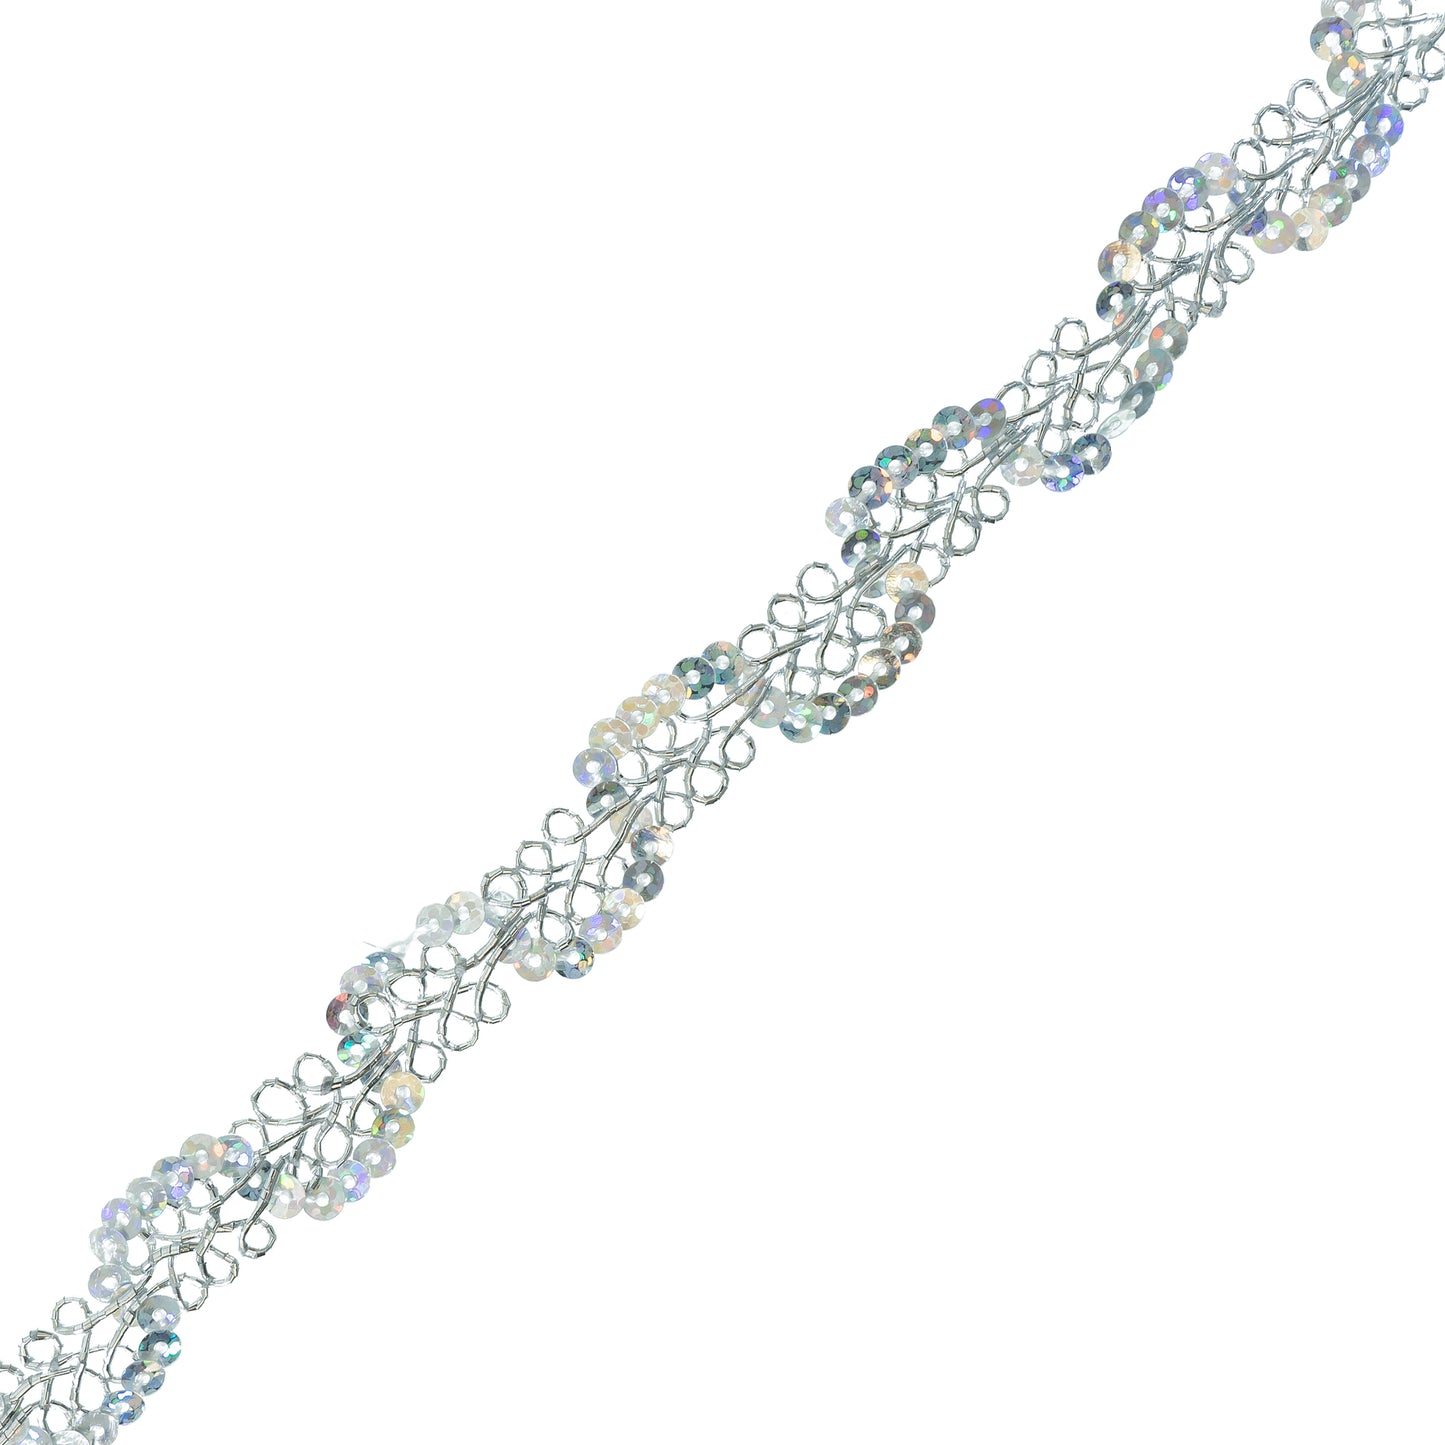 Lila Sequin Loop Braid Trim (1/2") (Sold by the Yard)